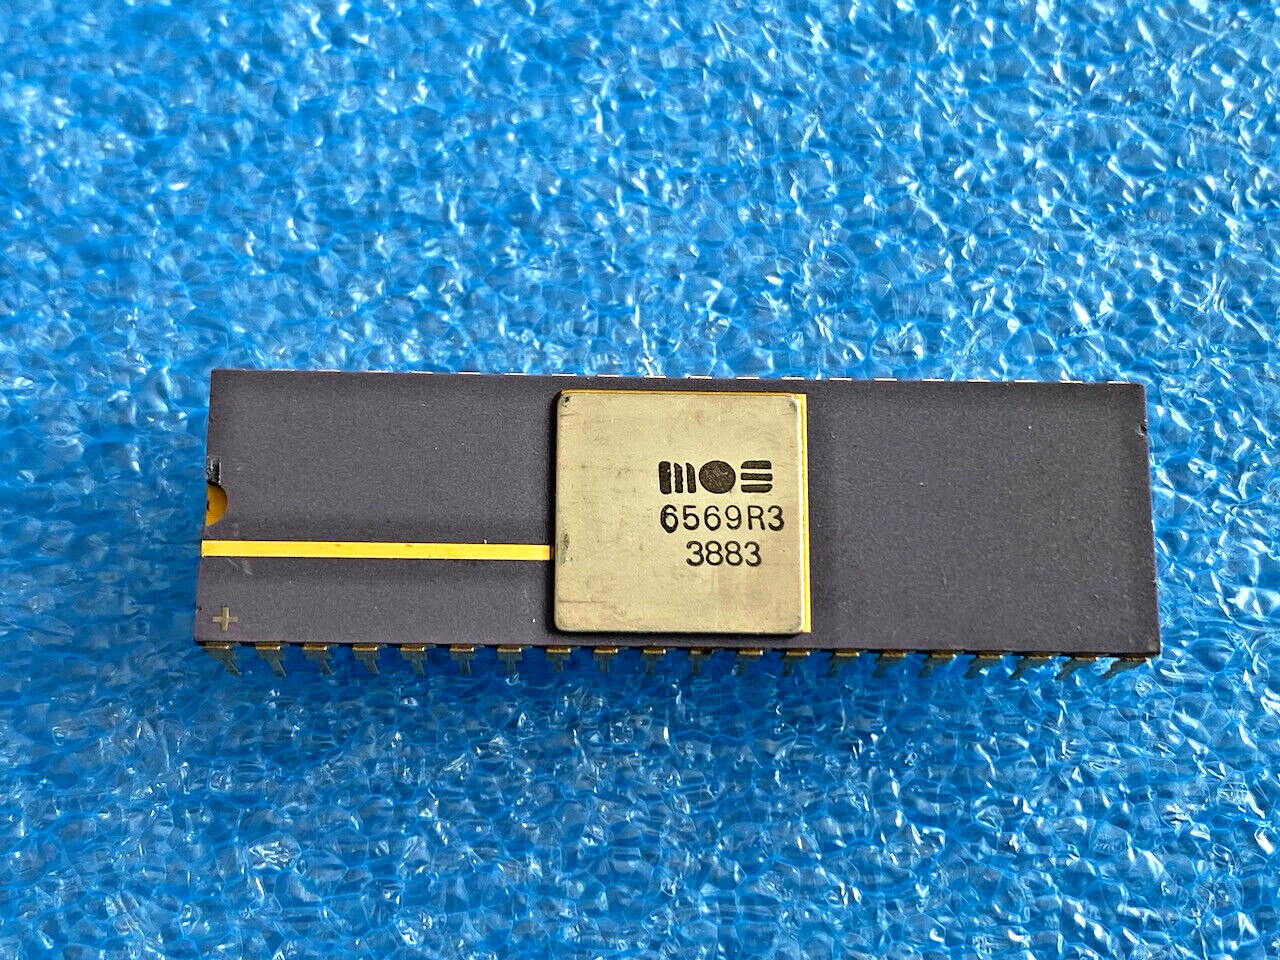 6569R3 Vic Video Chip Ic for Commodore C64, SX64, Ceramic Gold, Works #38 83